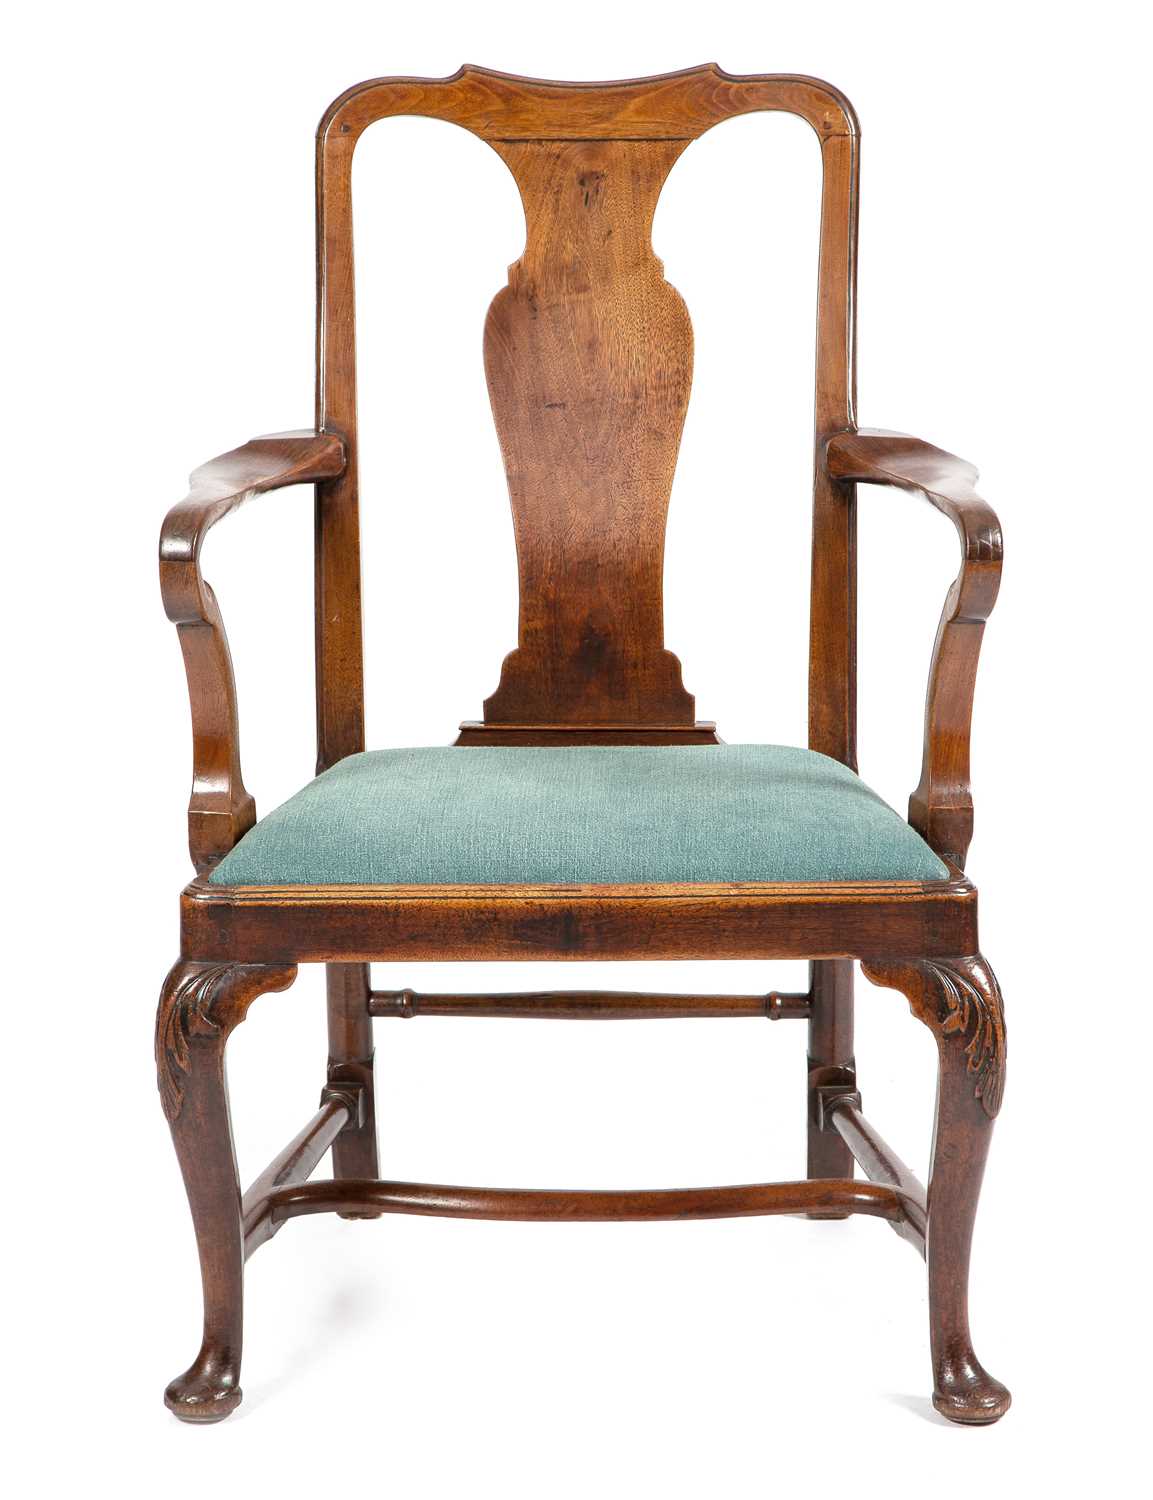 A GEORGE II VIRGINIAN WALNUT ARMCHAIR C.1740 with a moulded top rail above a solid splat and a later